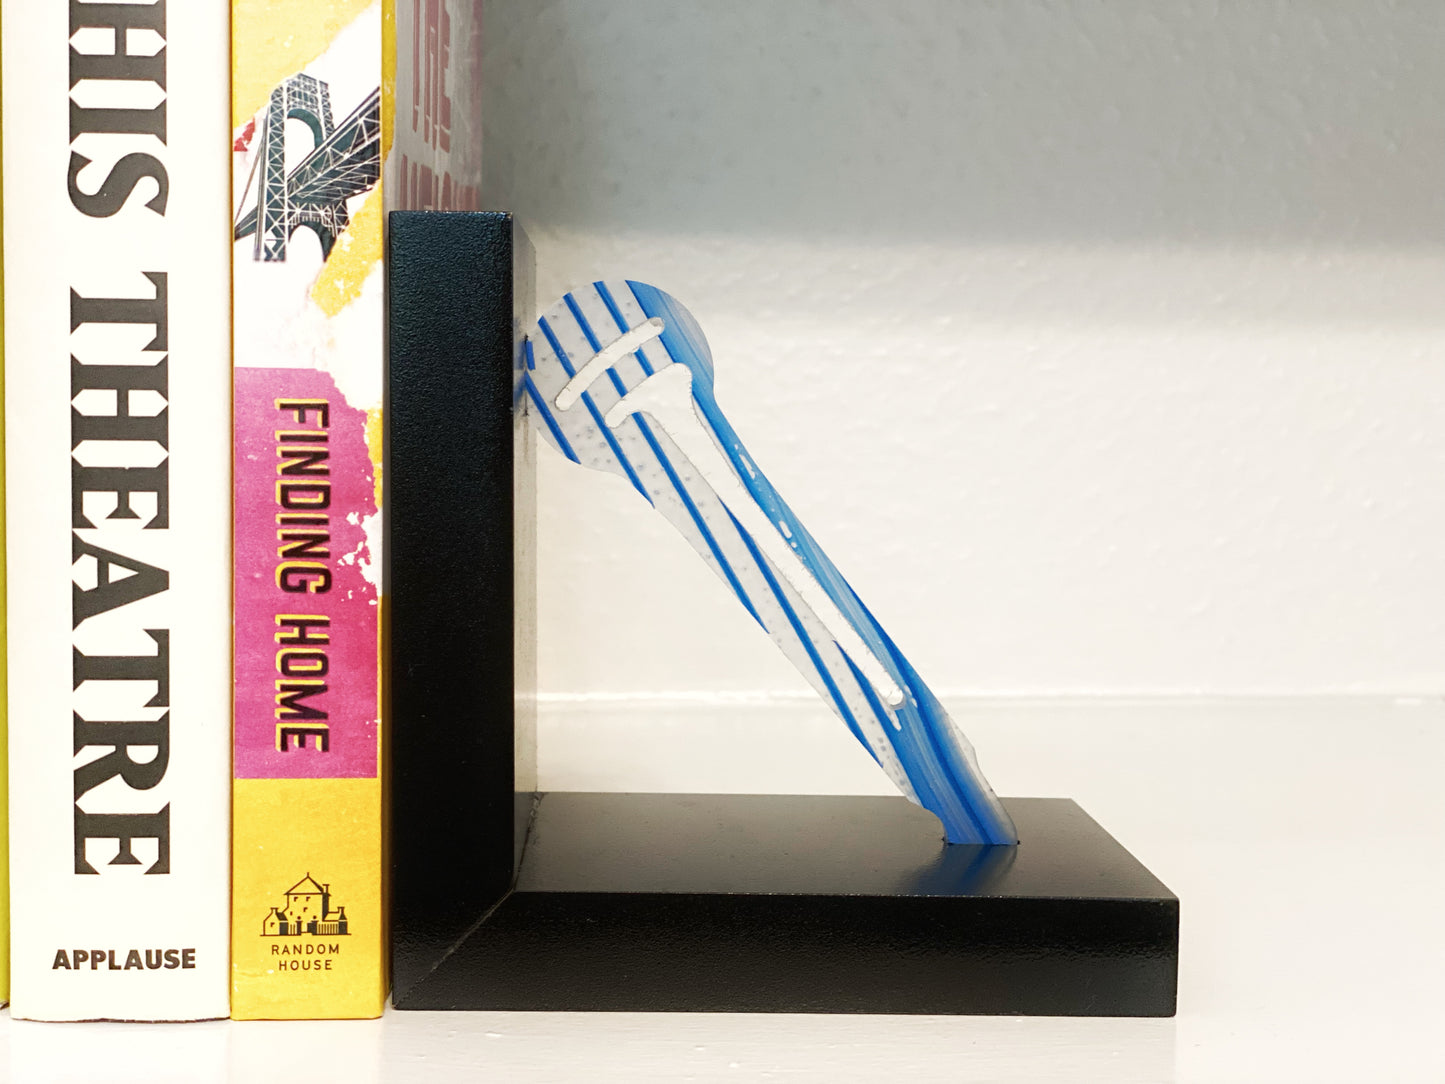 Load image into Gallery viewer, Freestyle Love Supreme Broadway Bookend - Scenery
